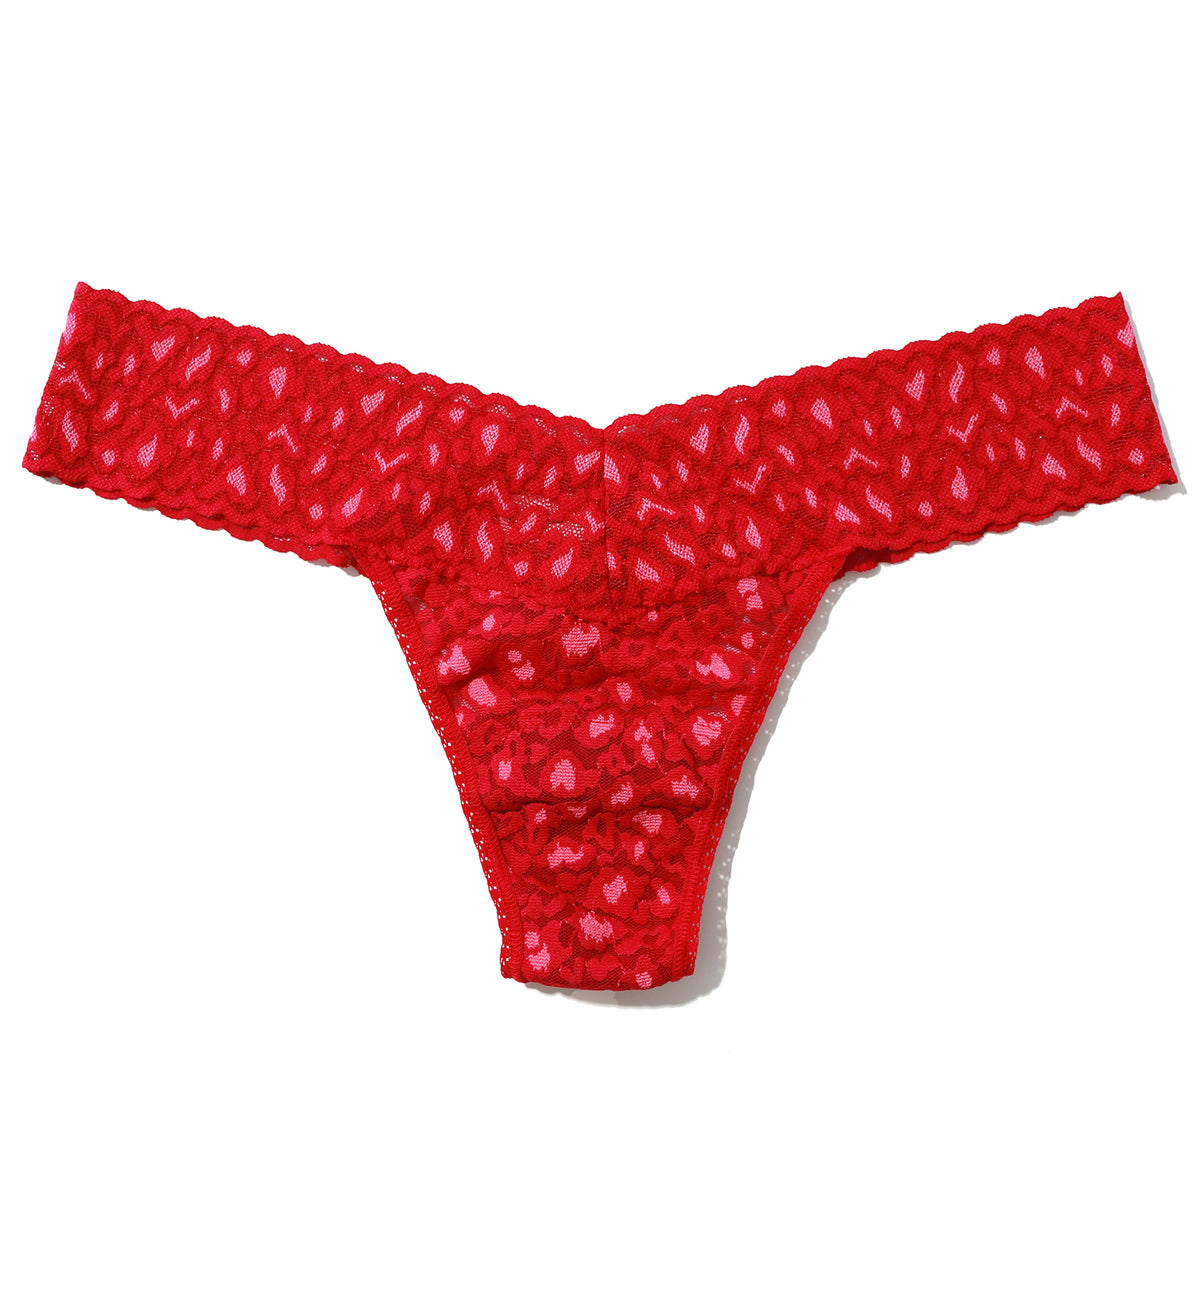 Hanky Panky Cross Dyed Leopard Low Rise Thong (7J1051P),Berry Sangria/Pink - Berry Sangria/Pink,One Size